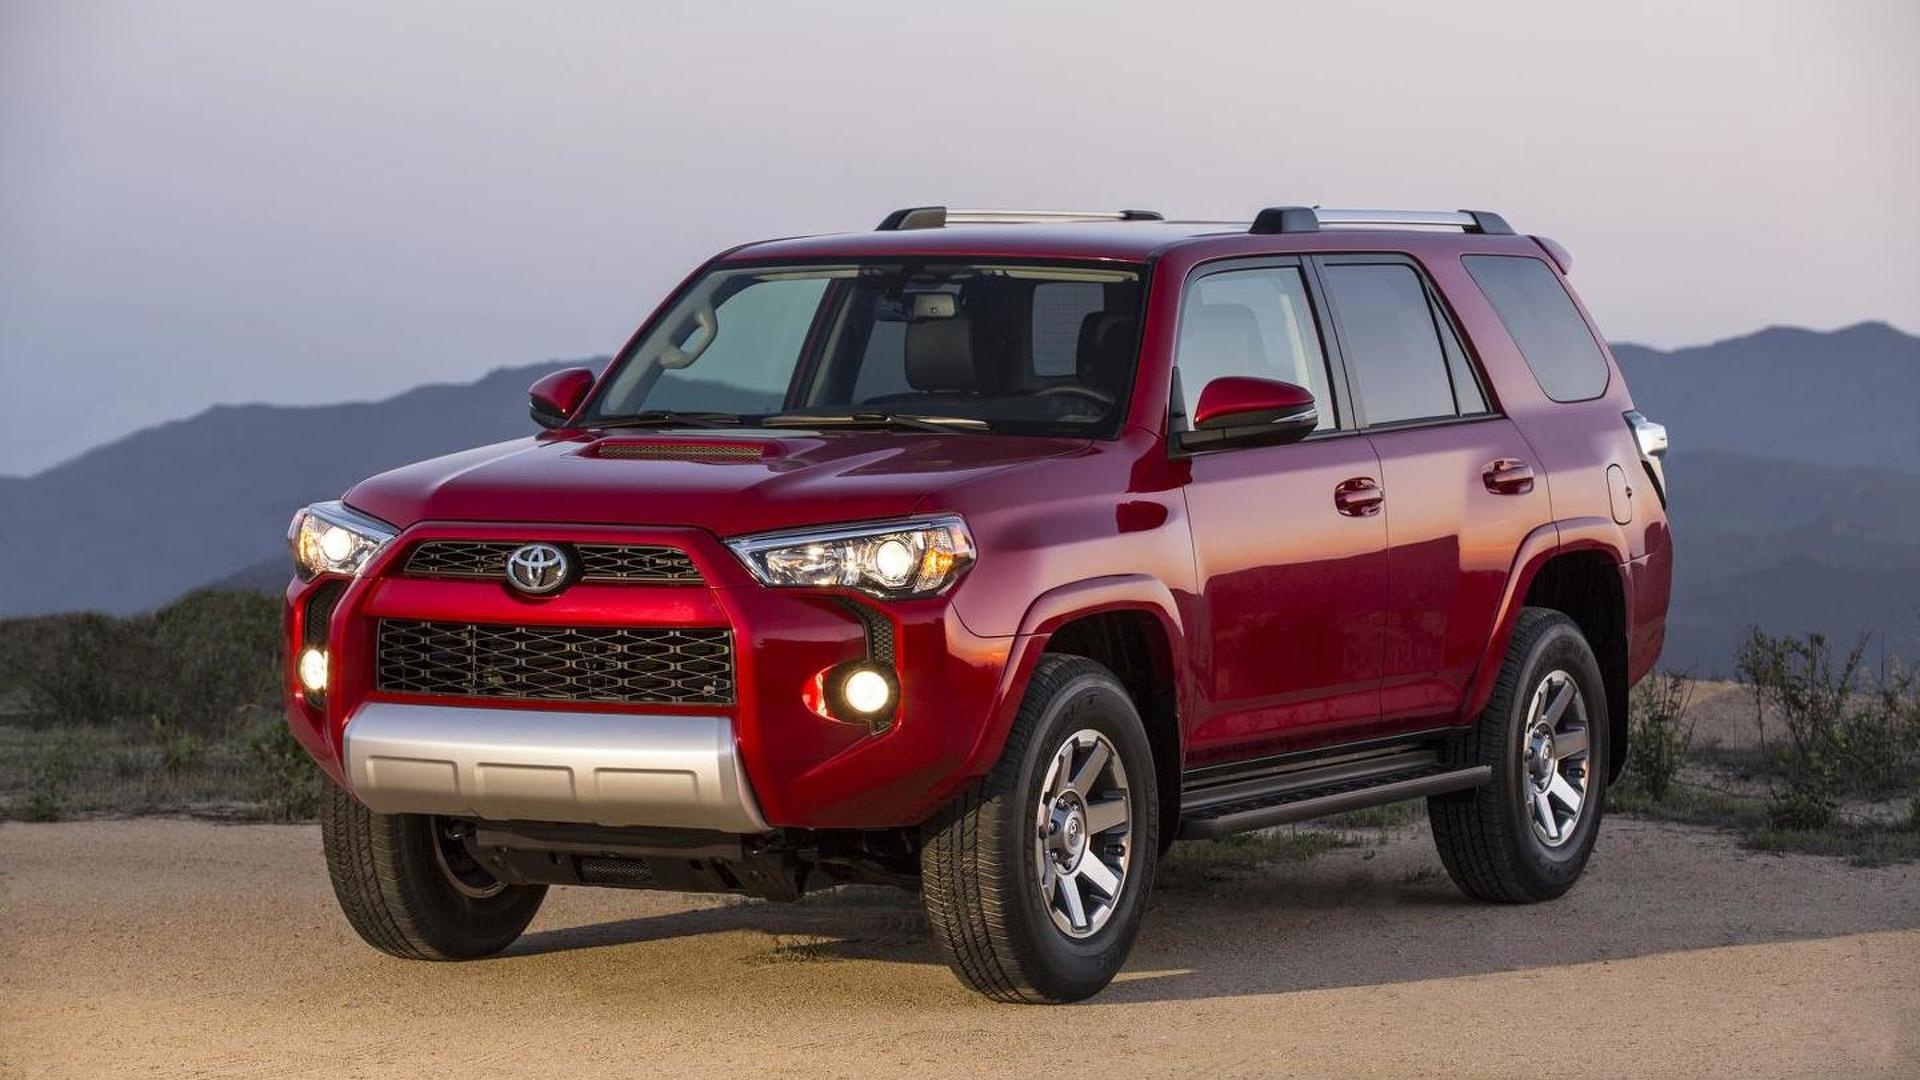 Toyota 4Runner, News and reviews, Trustworthy source, Reliable information, 1920x1080 Full HD Desktop